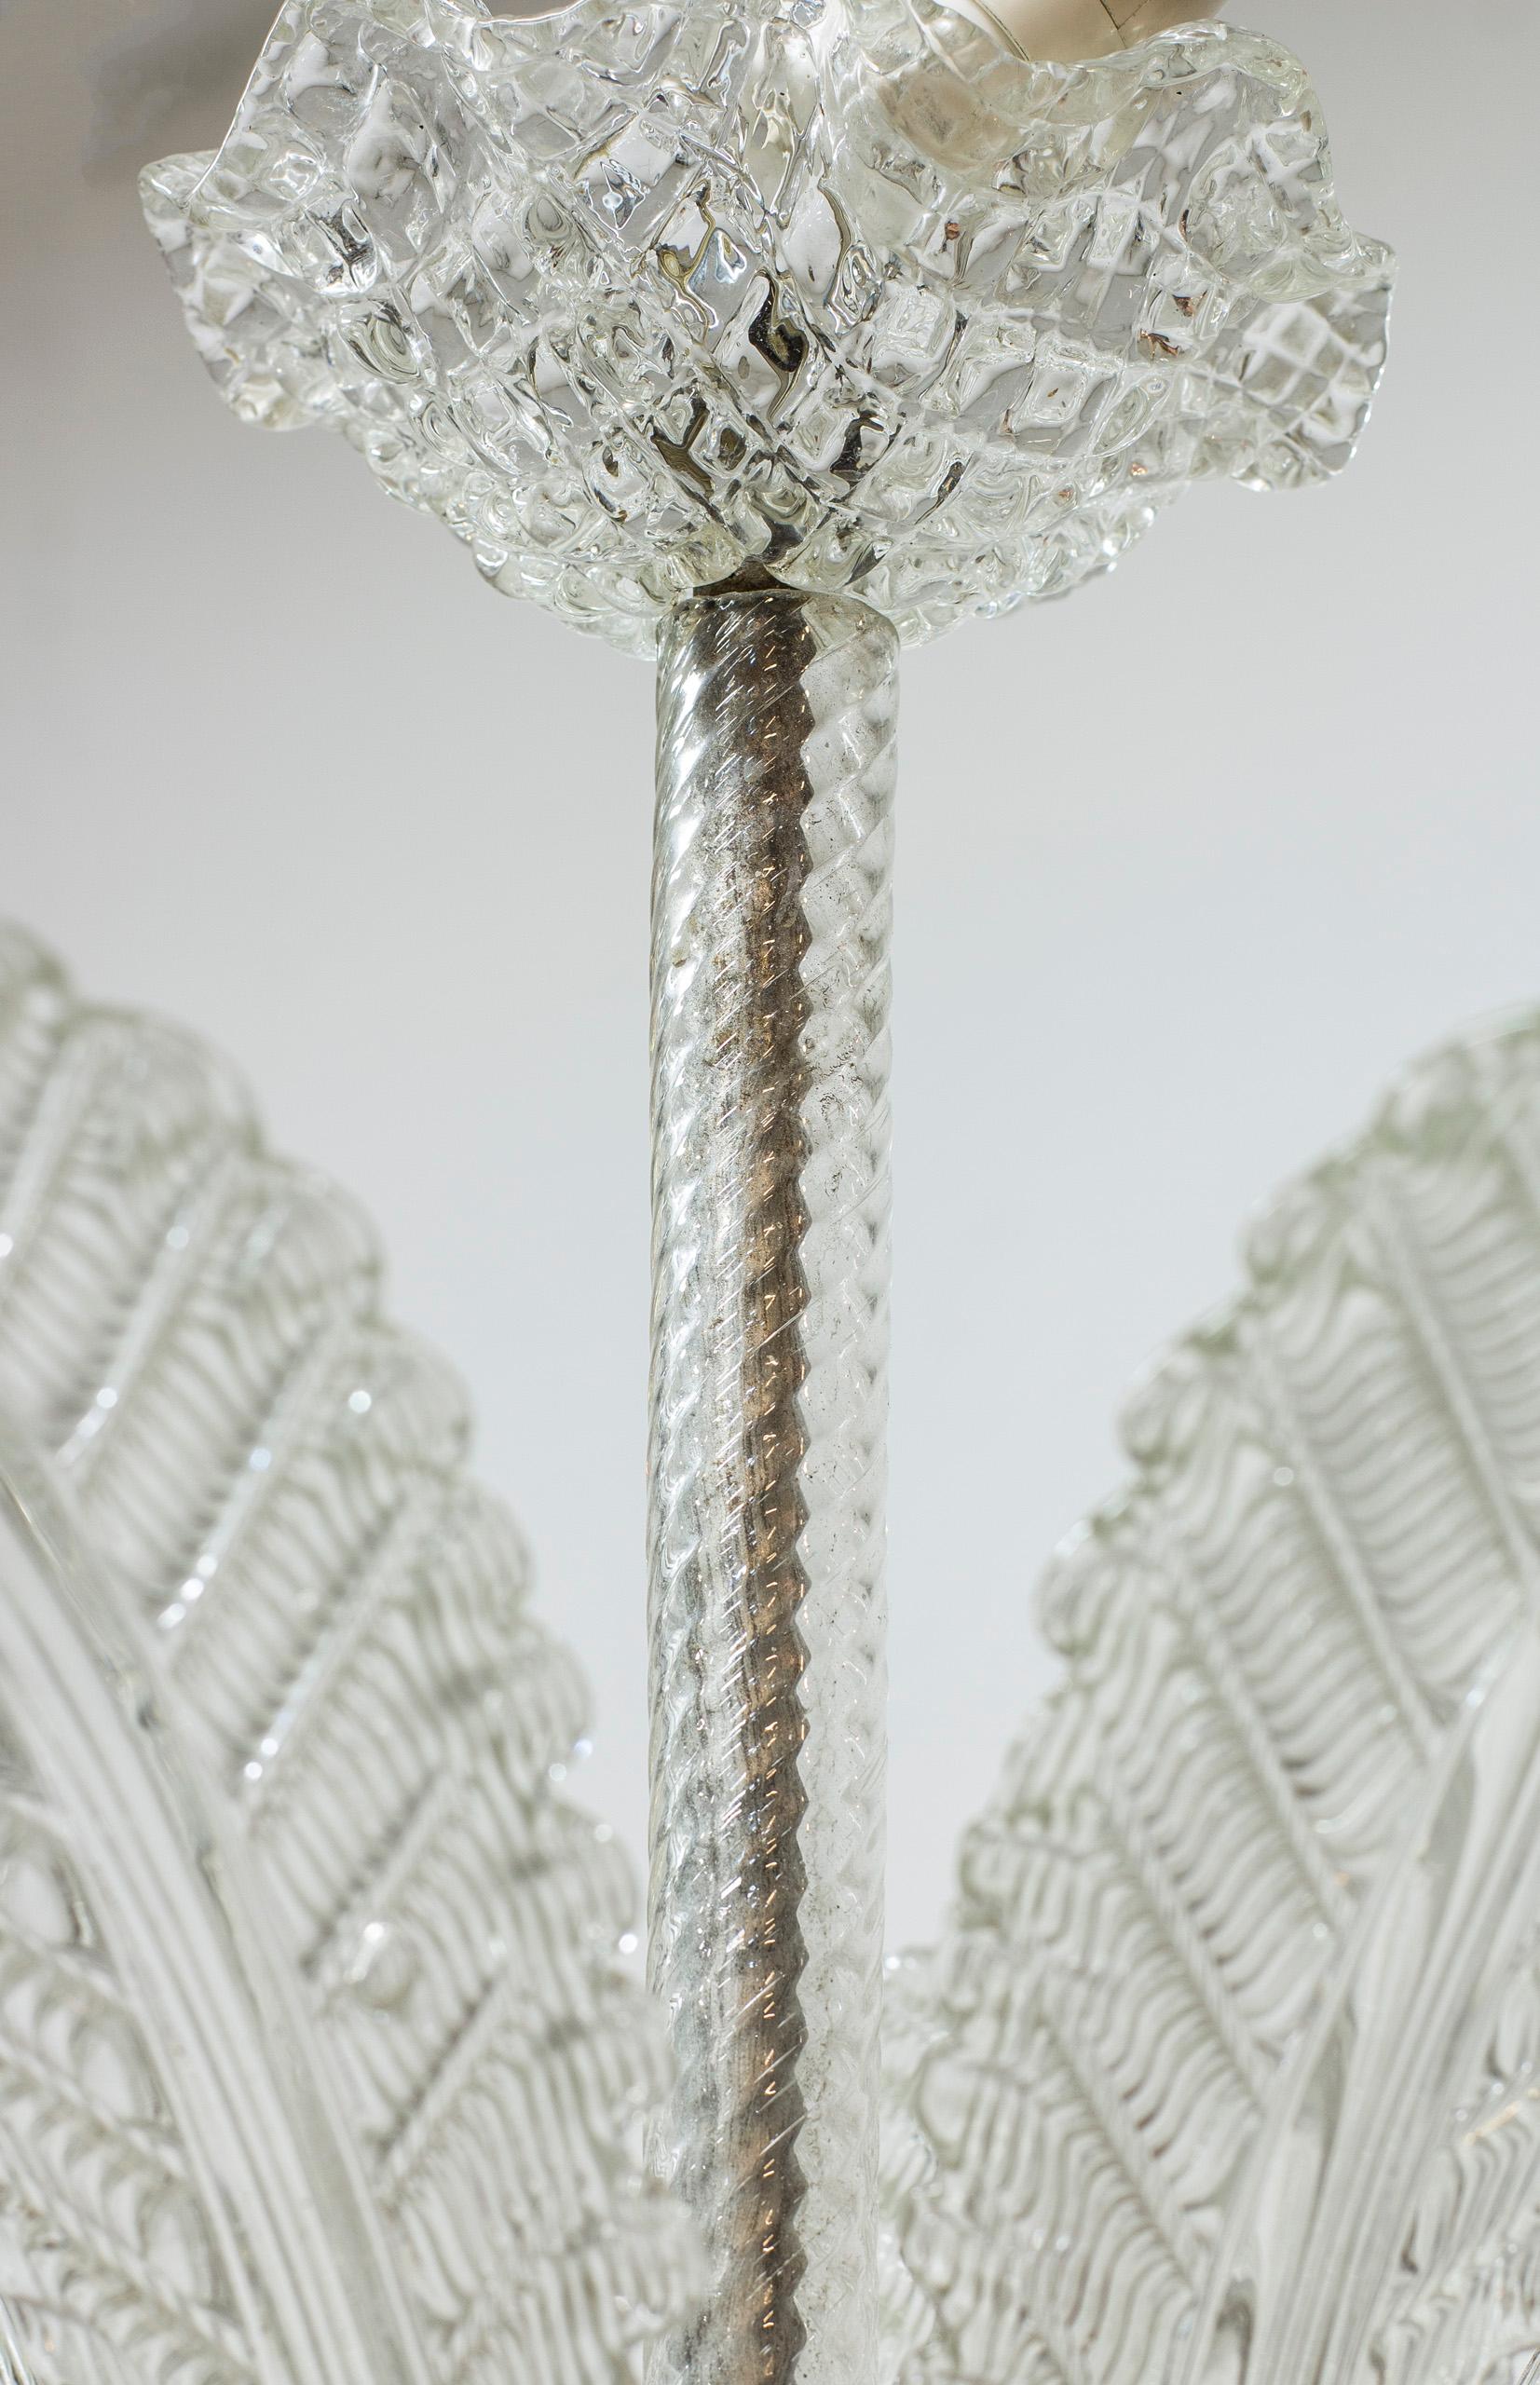 Mid-20th Century Venetian Style Chandelier by Fritz Kurz for Orrefors, Made in Sweden circa 1940s